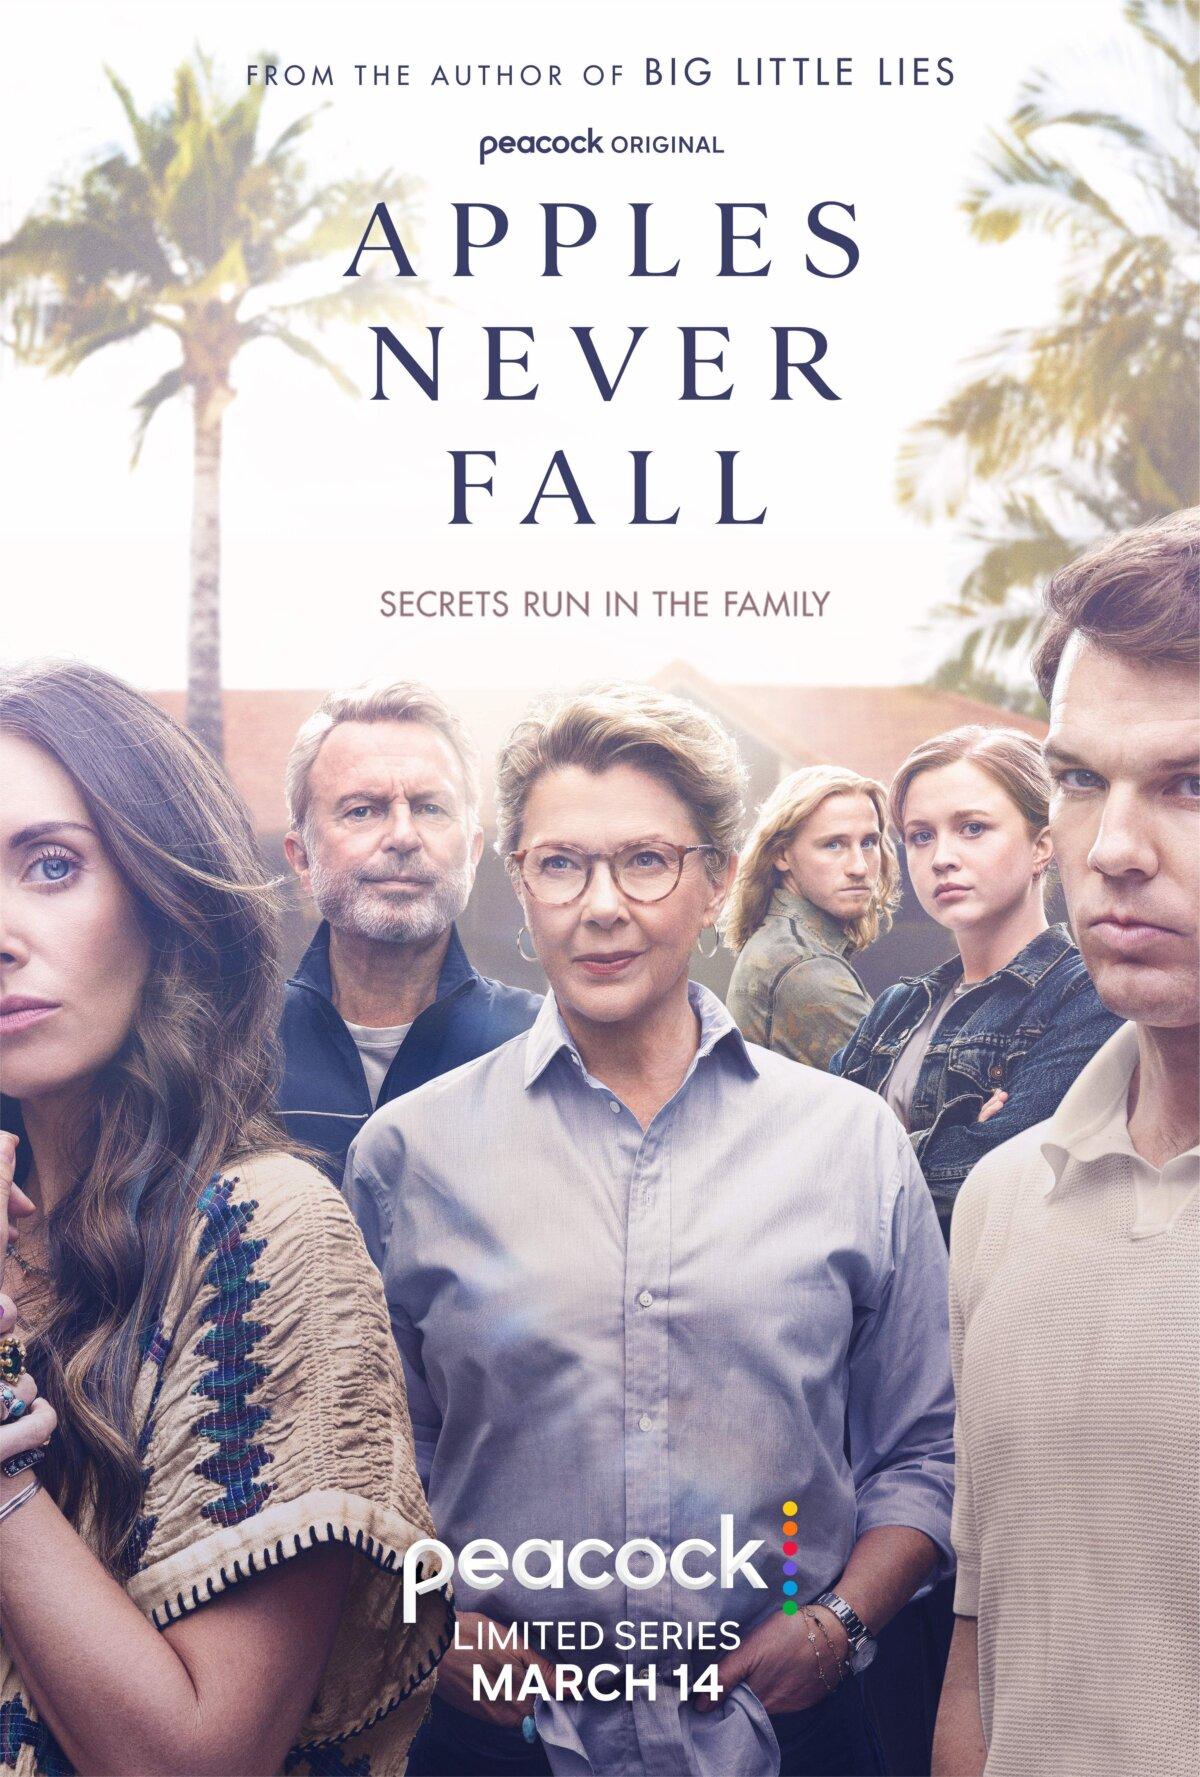 Theatrical poster for "Apples Never Fall." (Peacock)